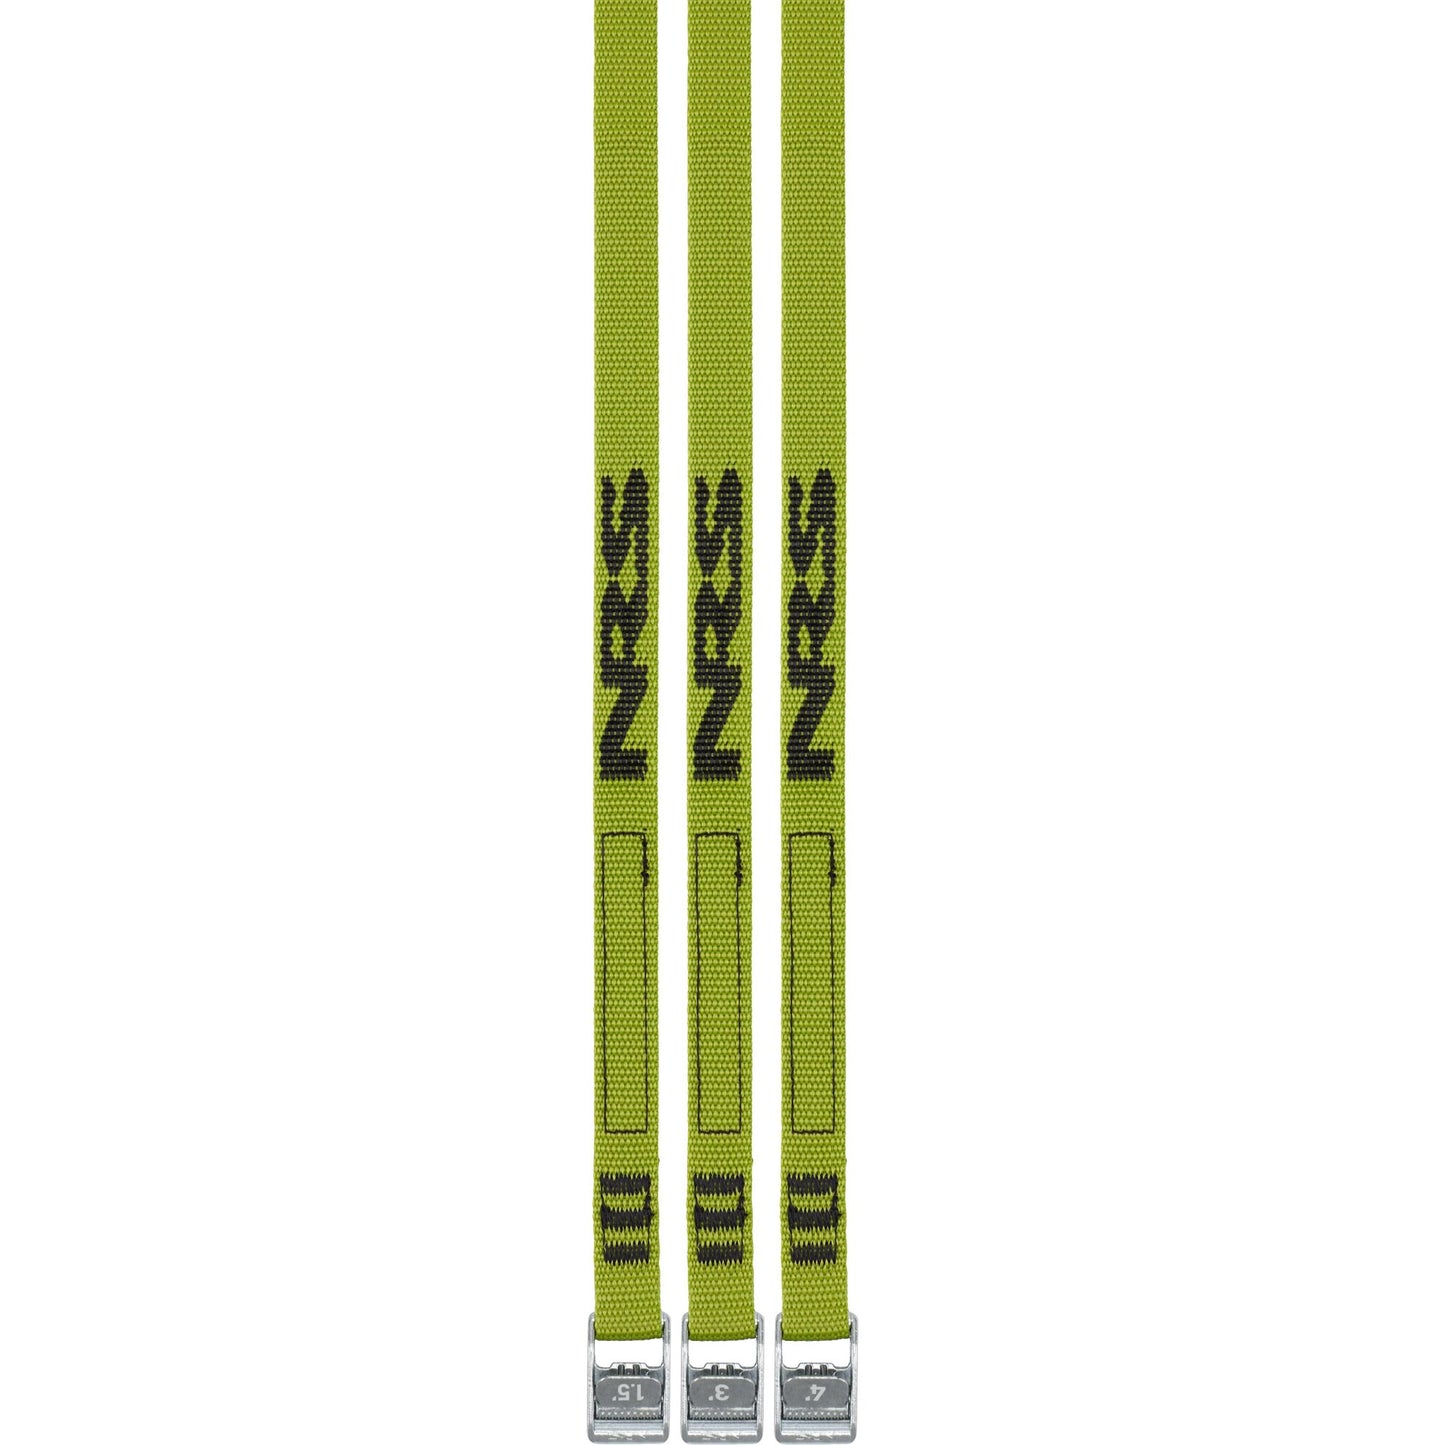 A set of NRS Micro Straps 5/8" in green and black colors on a white background.